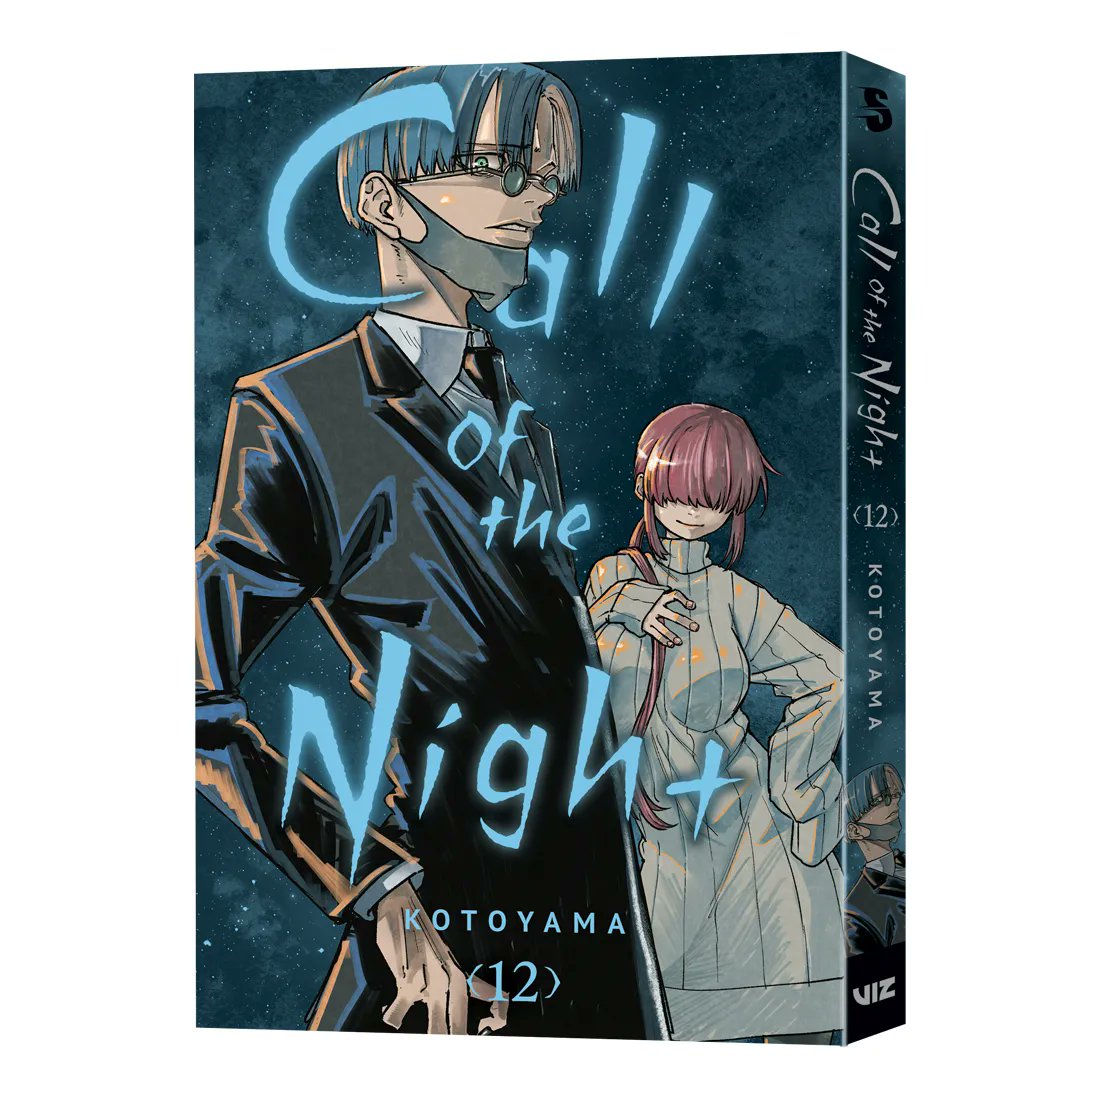 Call of the Night, Vol. 12 (12) by Kotoyama